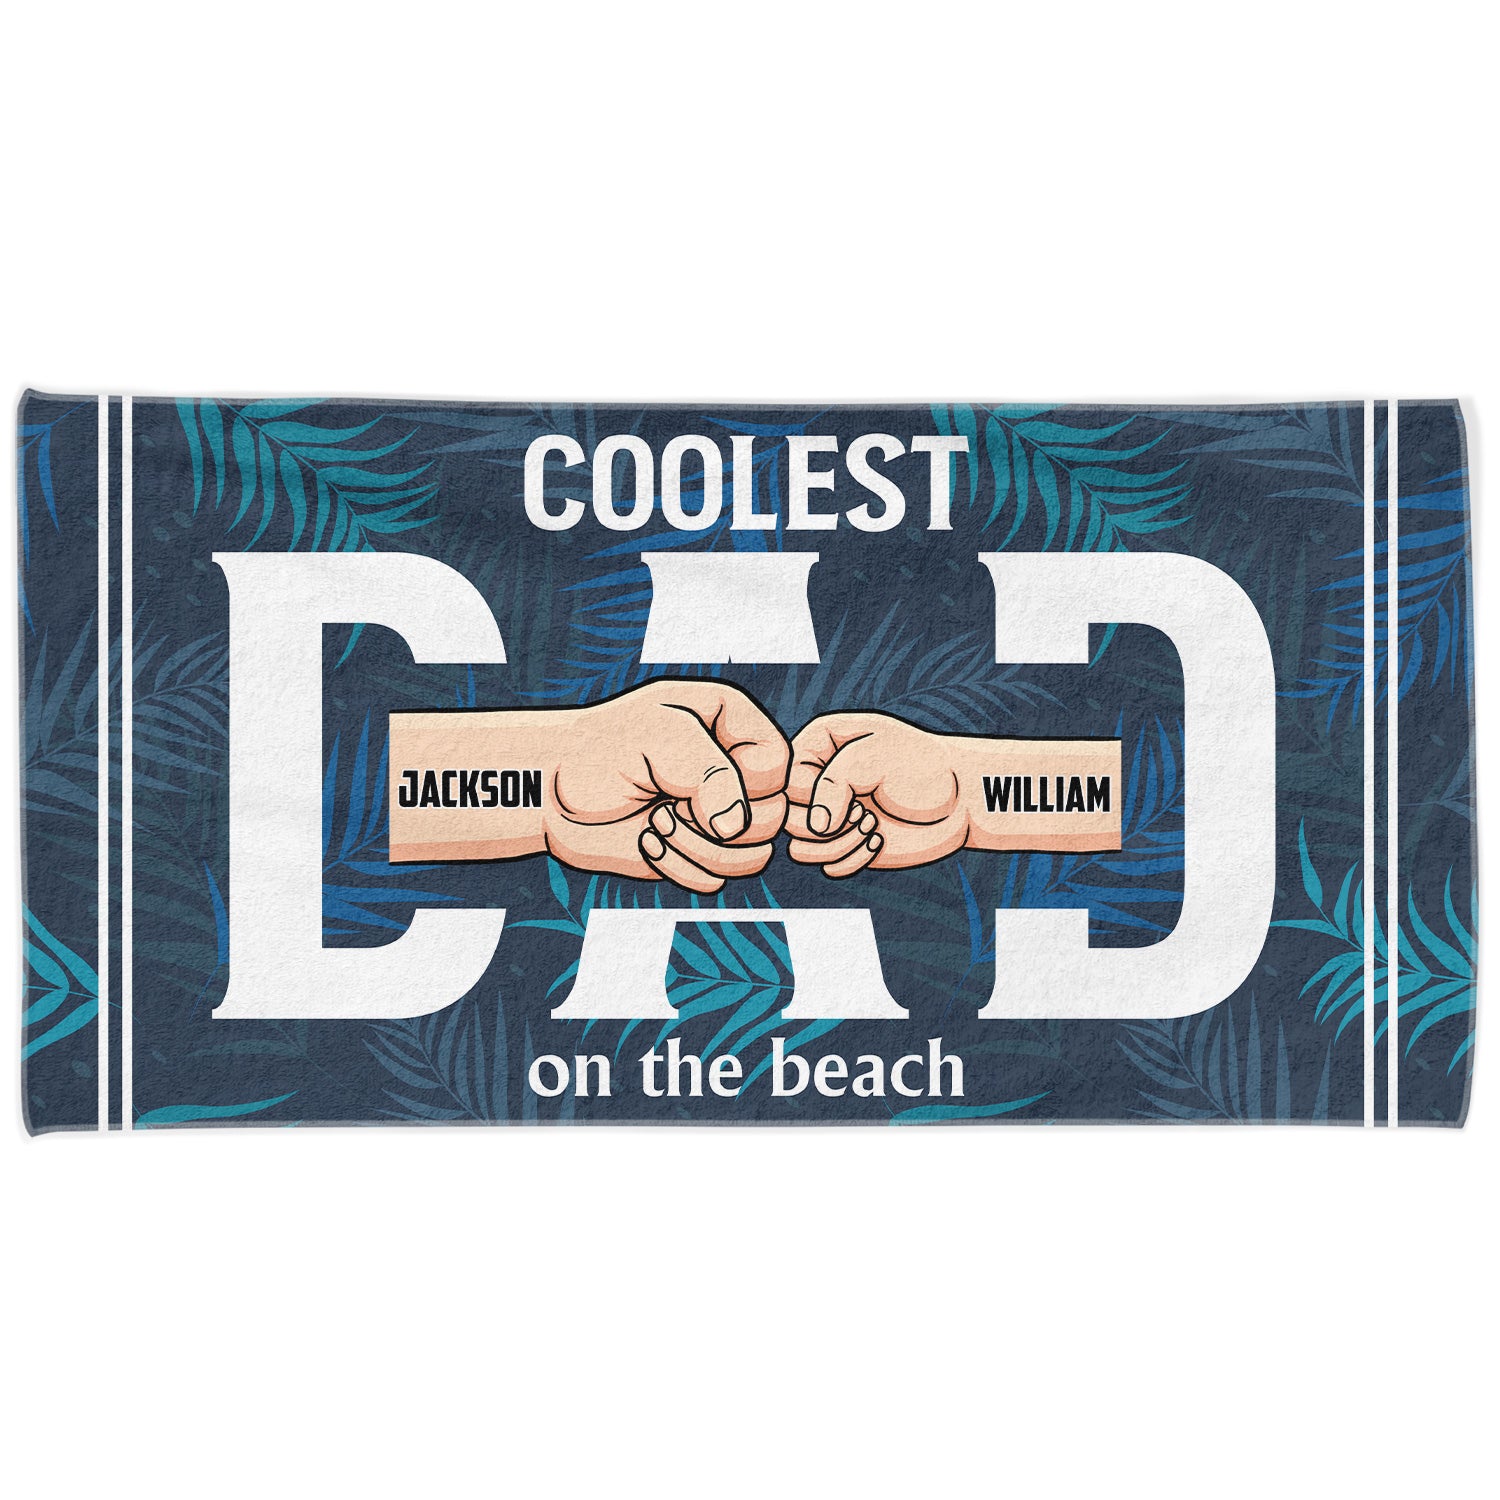 Coolest Dad On The Beach - Personalized Beach Towel